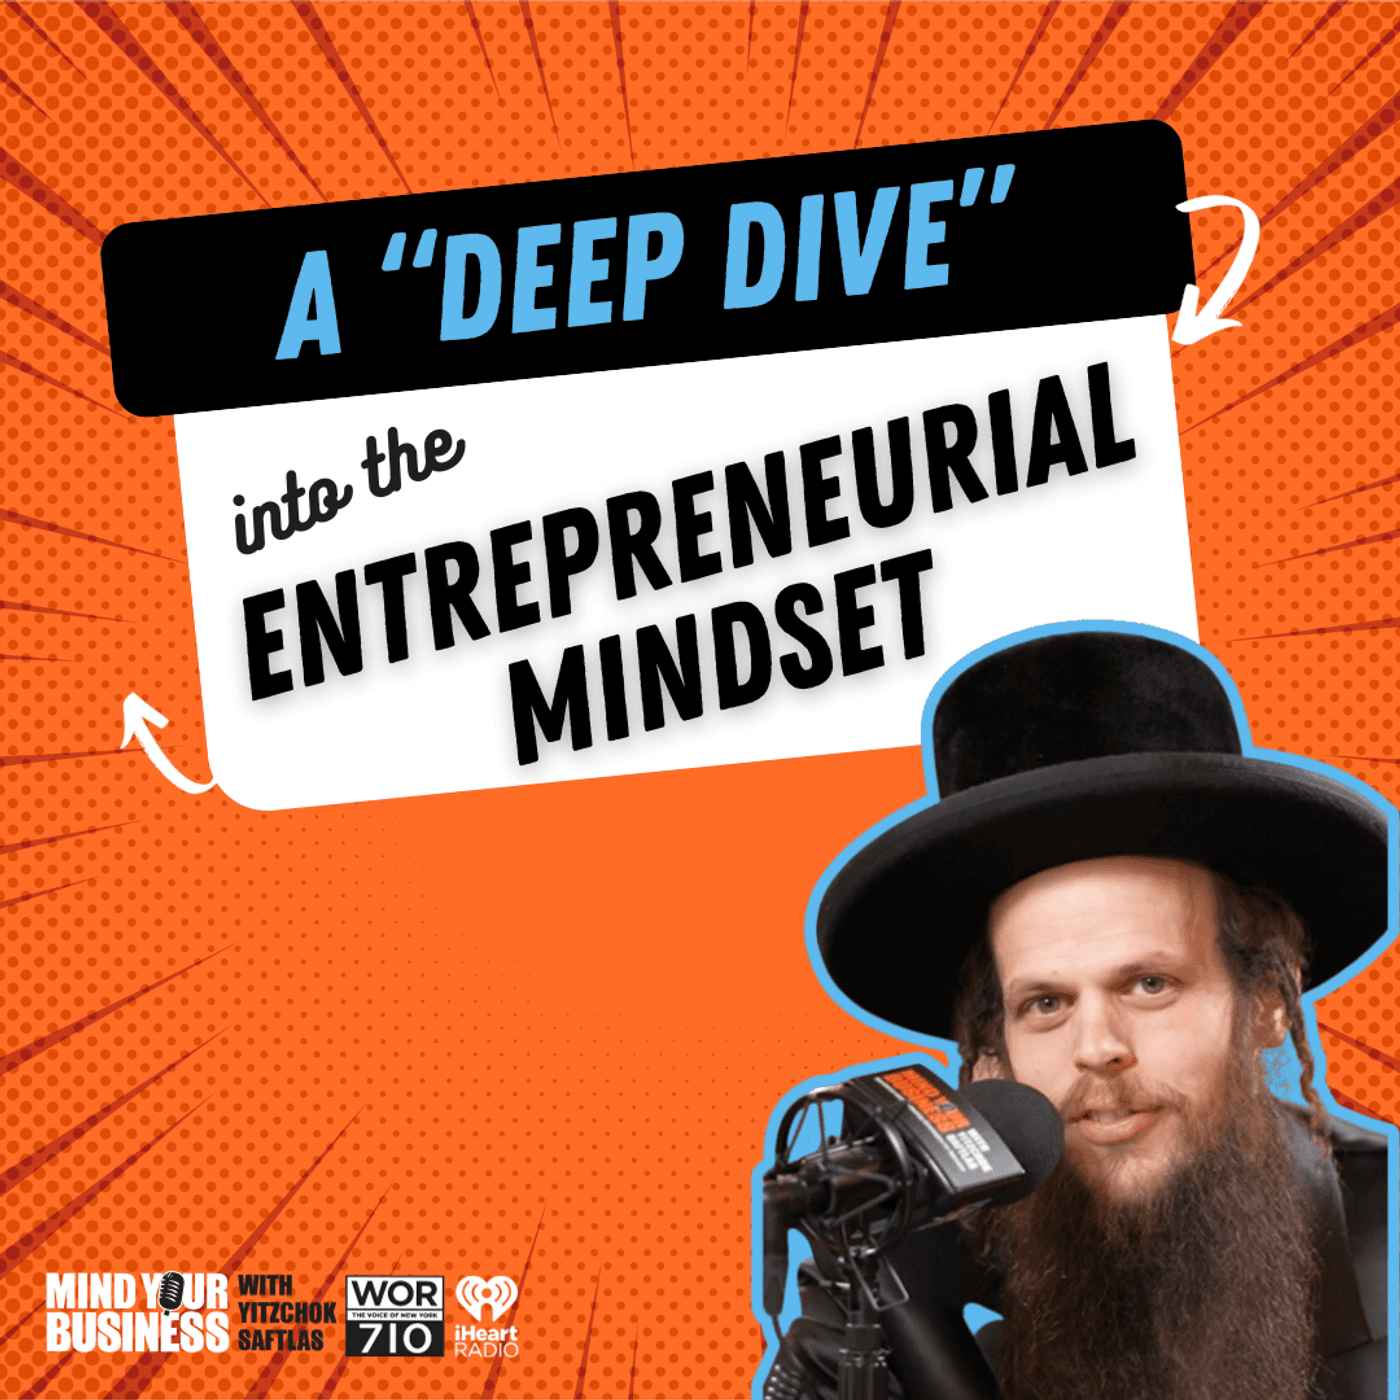 379: A “Deep Dive” into the Entrepreneurial Mindset featuring Rabbi Issamar Ginzberg